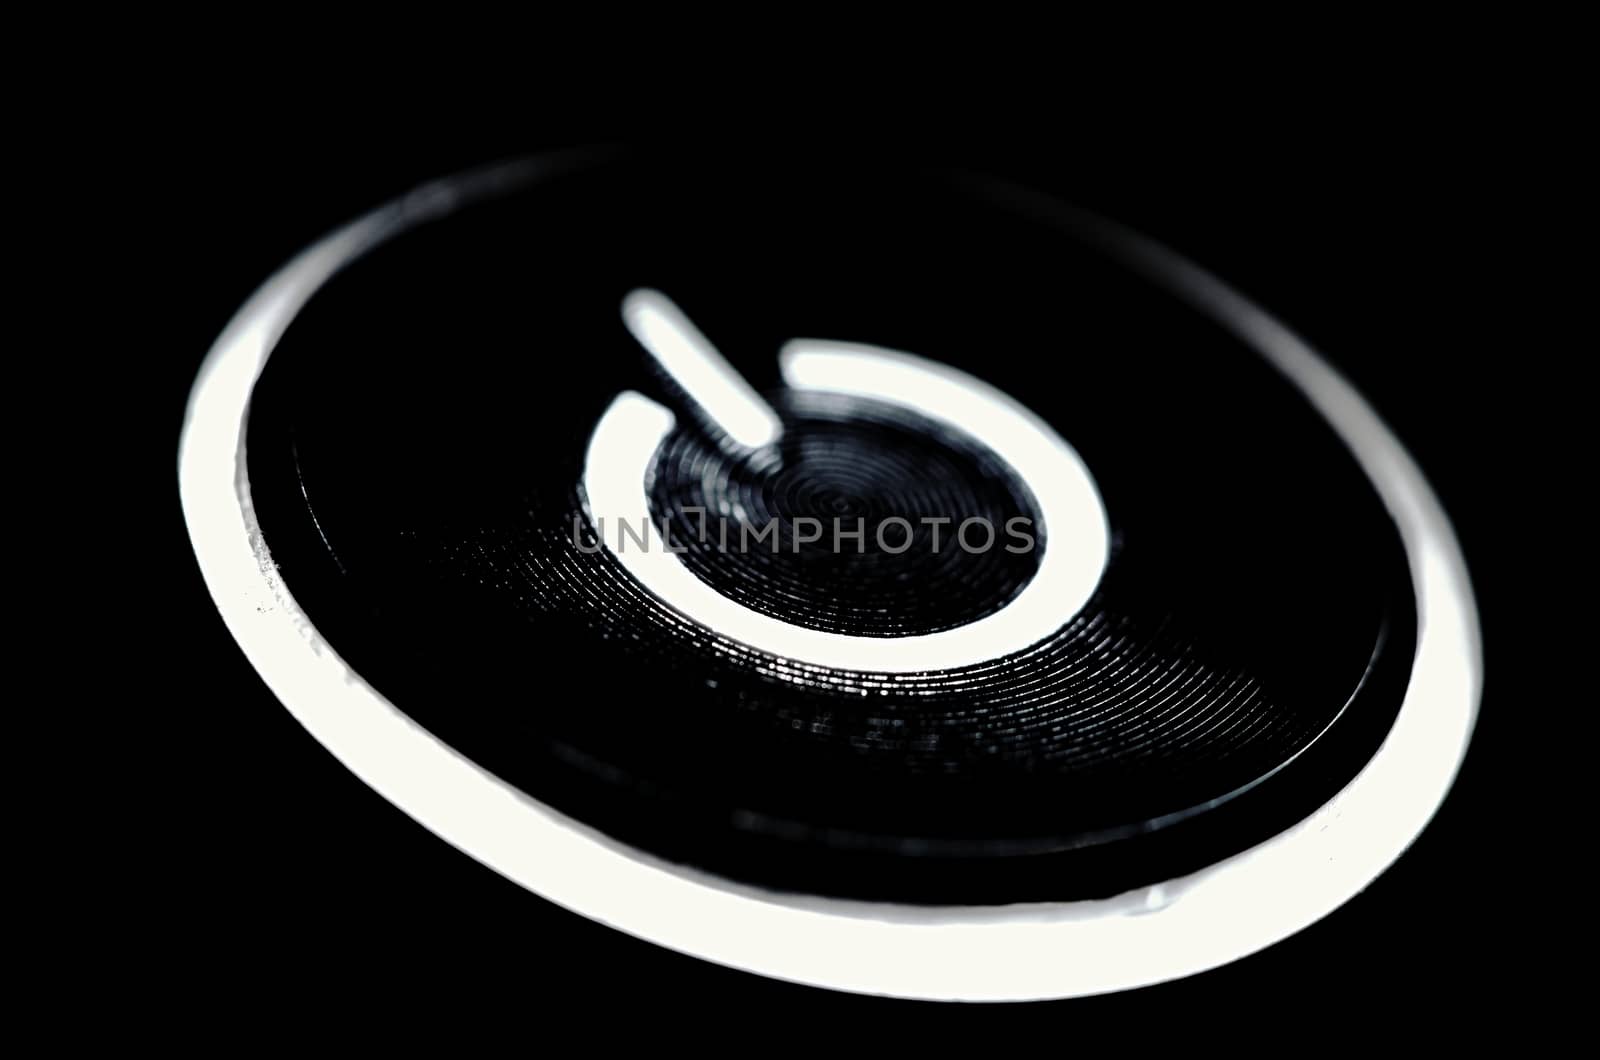 The Colorful coffeemaker button, light on off symbol